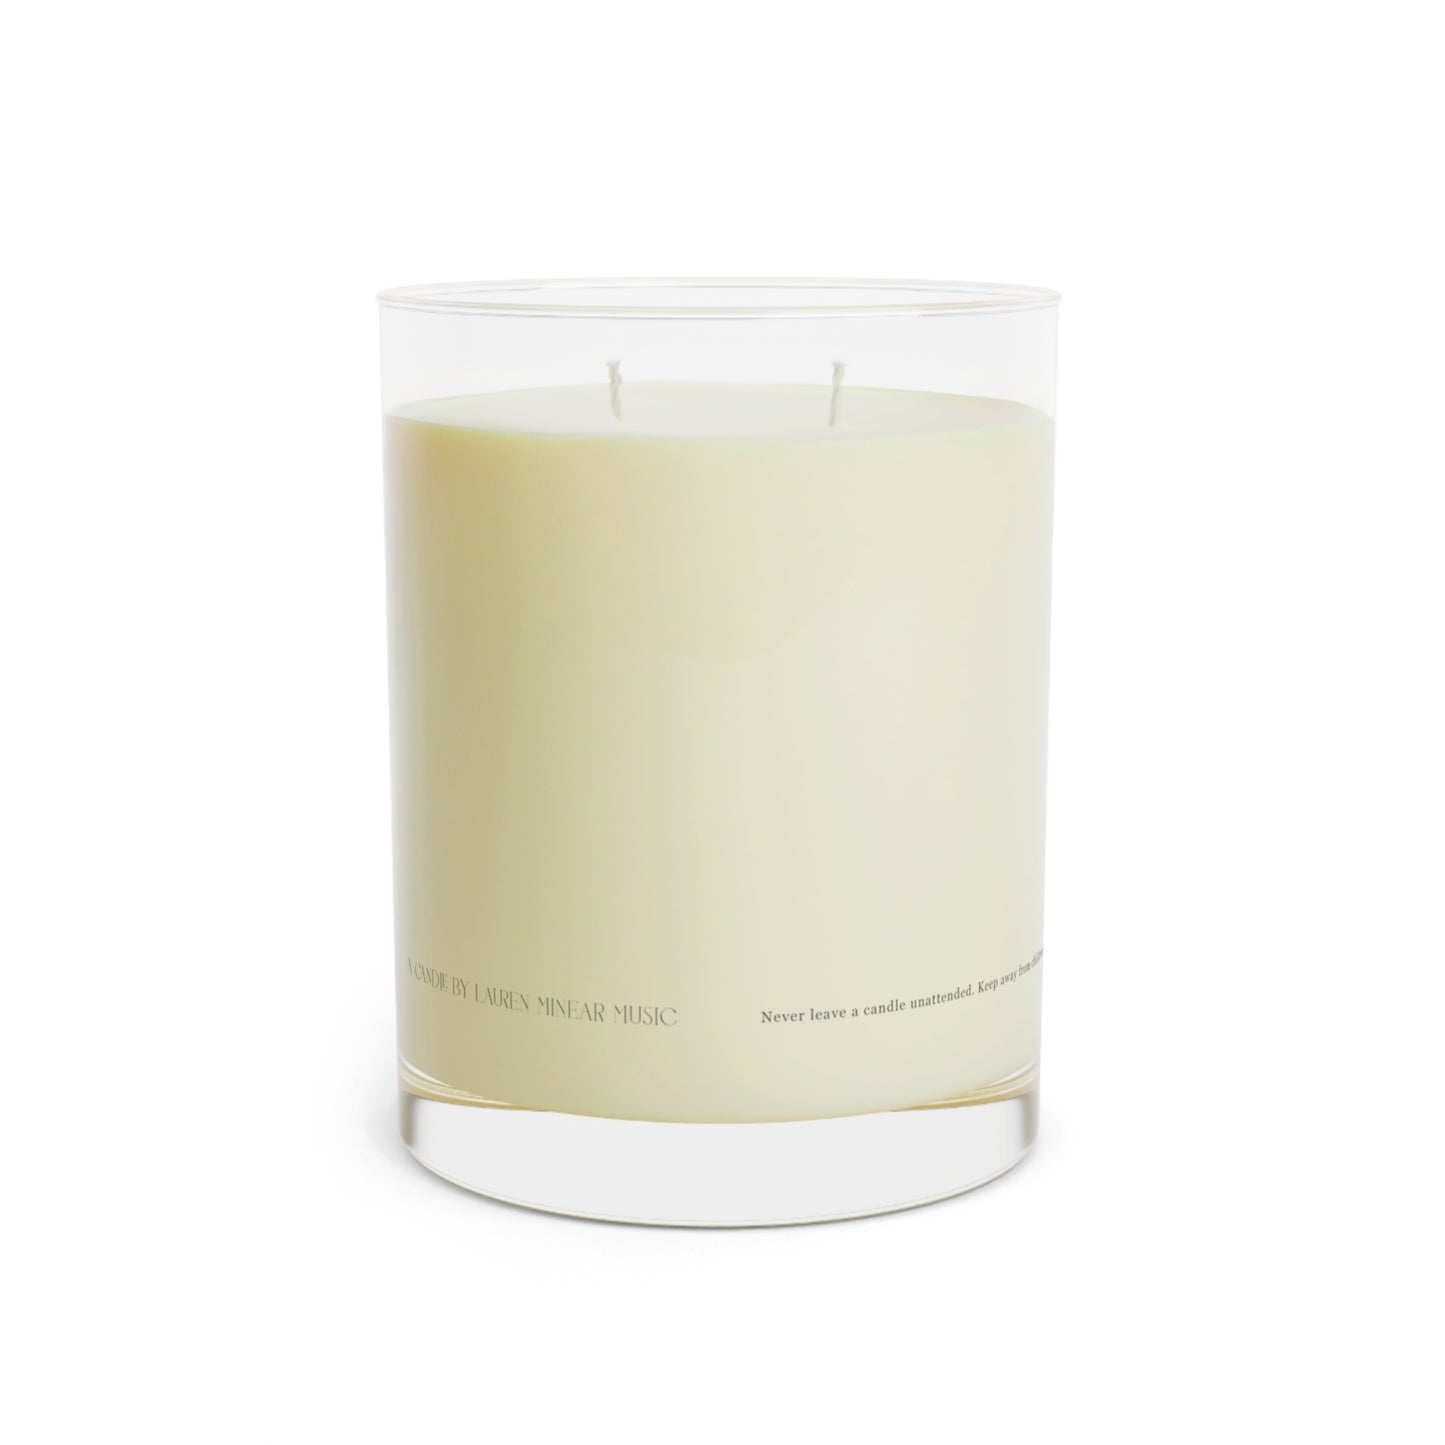 Scents of the future - Minted Lavender and Sage Scented Candle